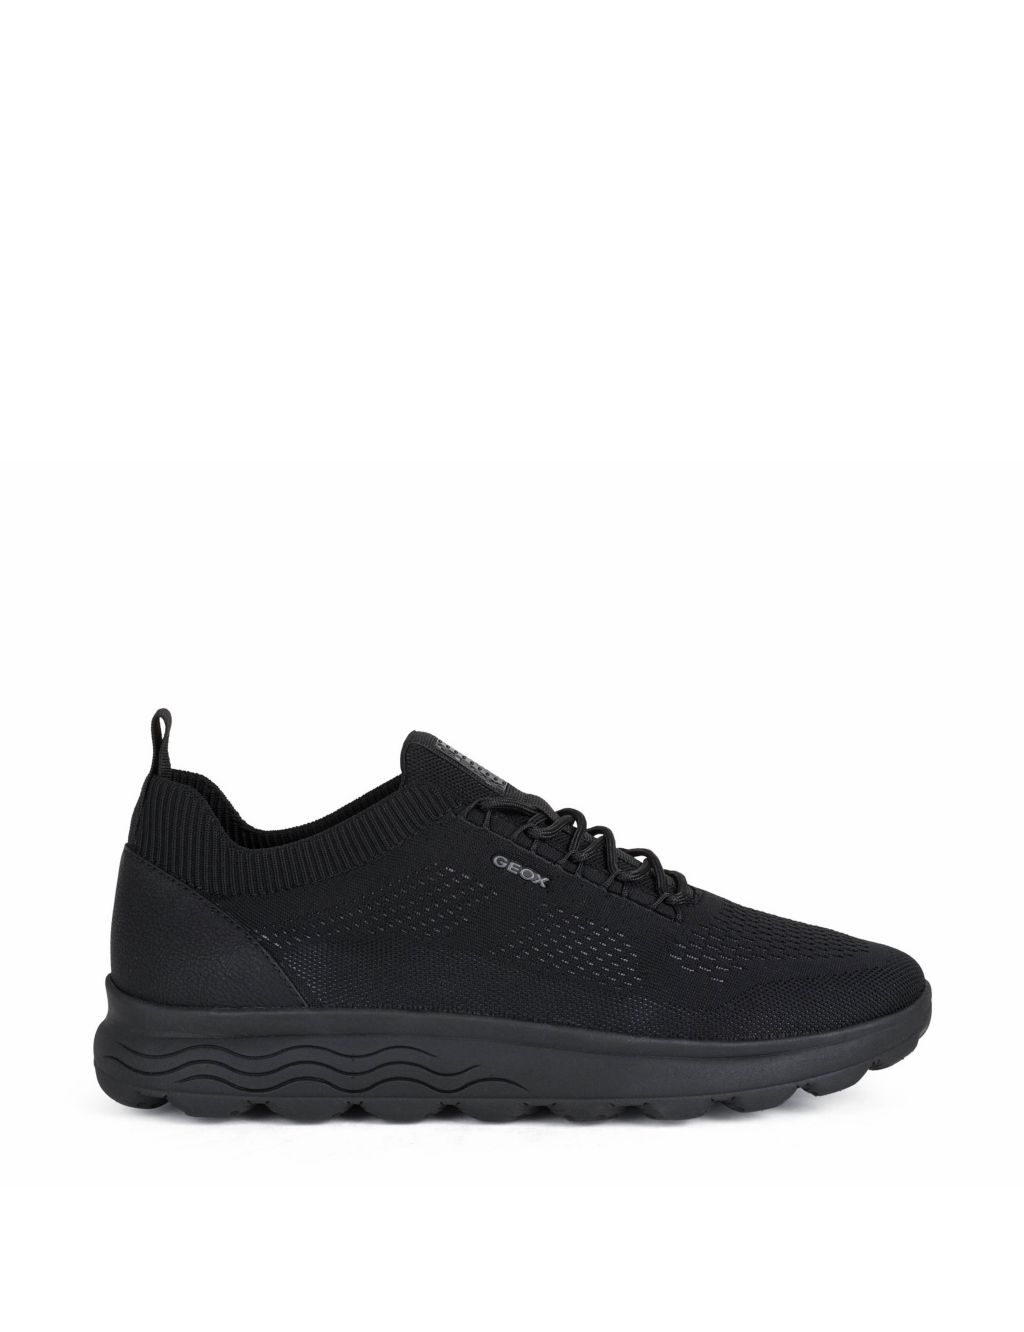 Wide Fit Lace Up Trainers image 1